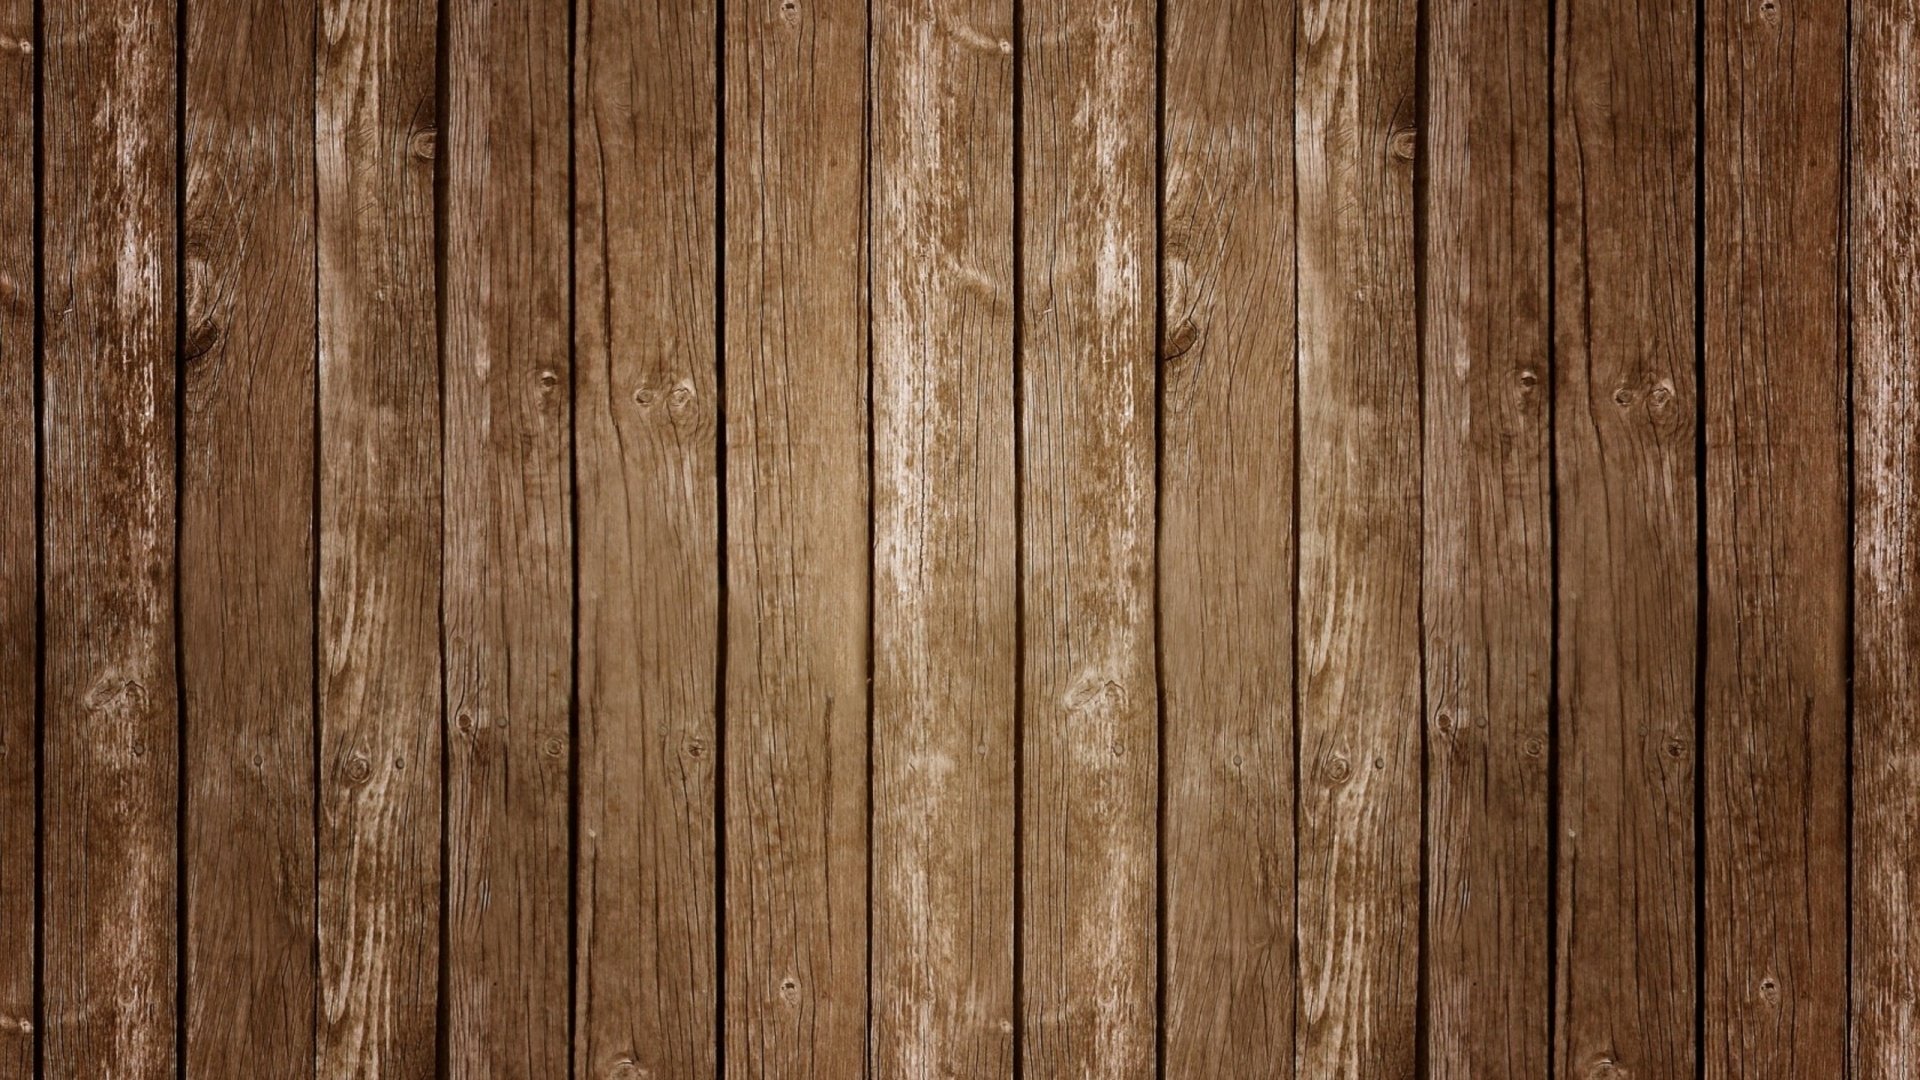 Wallpaper That Looks Like Wood 07 0f 10 with Barn Wood Wallpaper. Wallpaper Download. High Resolution Wallpaper